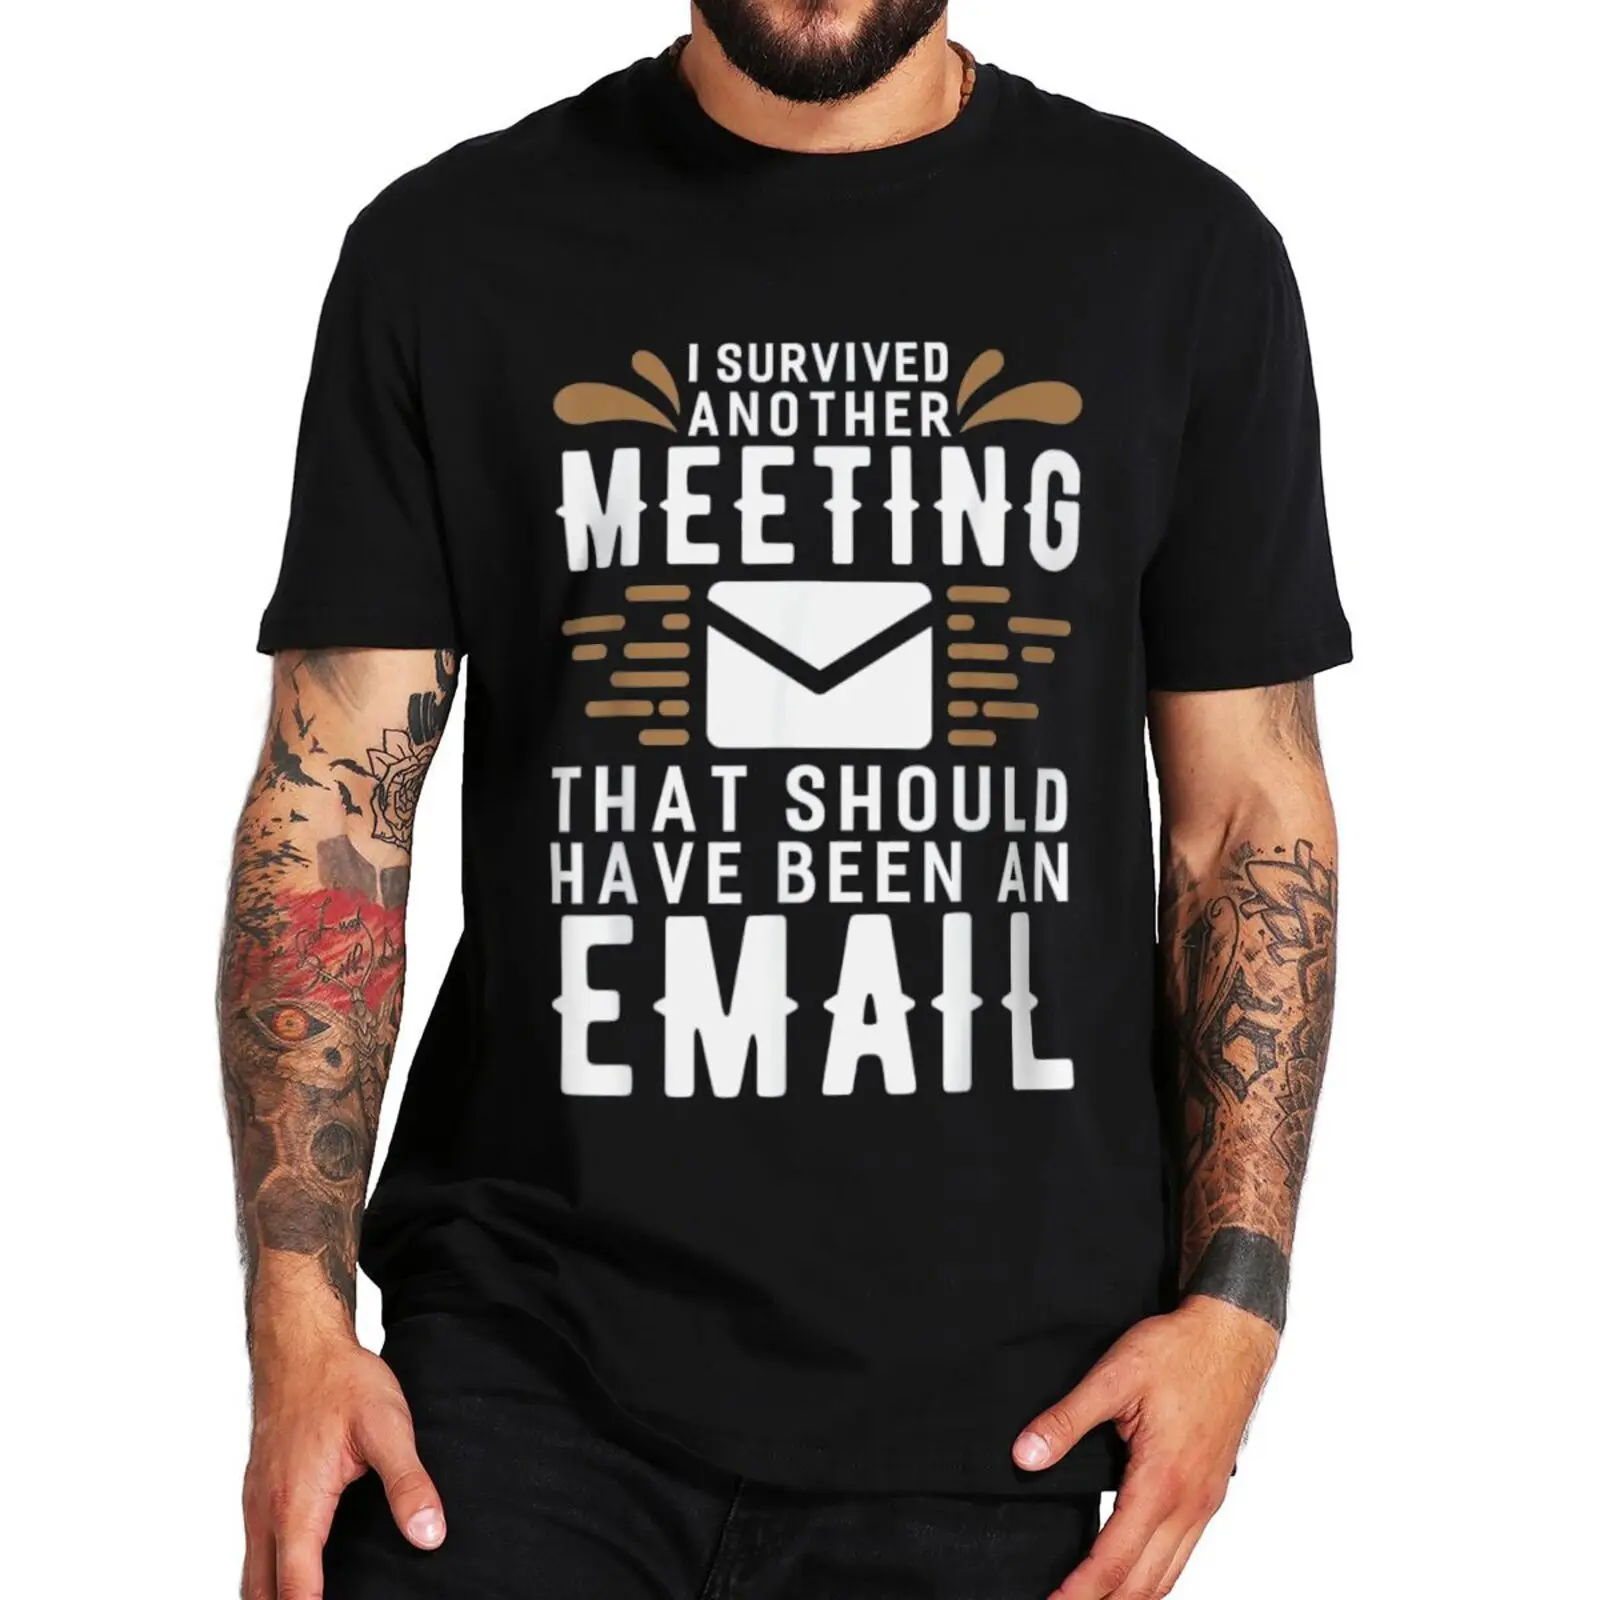 

I Survived Another Meeting That Should Have Been An Email T-shirt Funny Memes Jokes Gift Tee Tops Cotton Casual Summer T Shirt